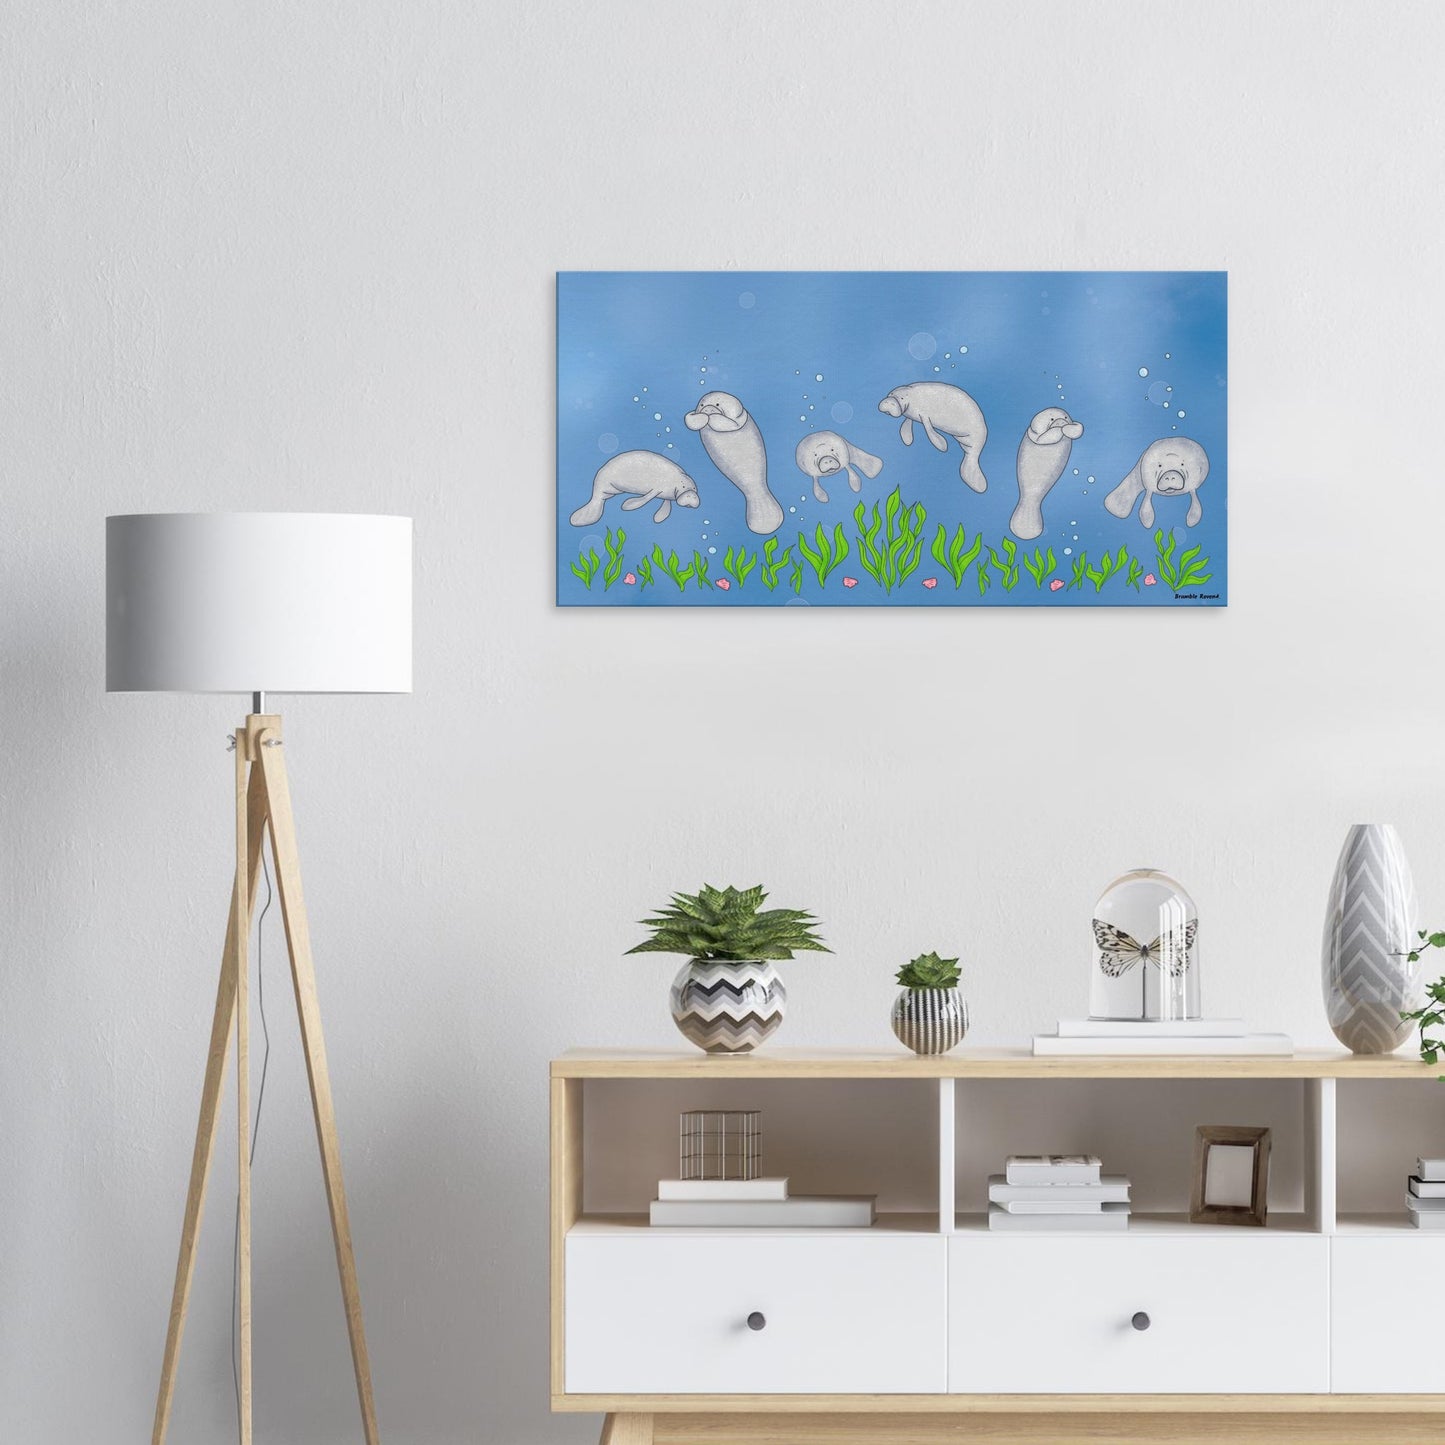 20 by 40 inch slim canvas wall art print featuring cute illustrated manatees swimming above the seabed. Shown on white wall above end table by a white lamp.